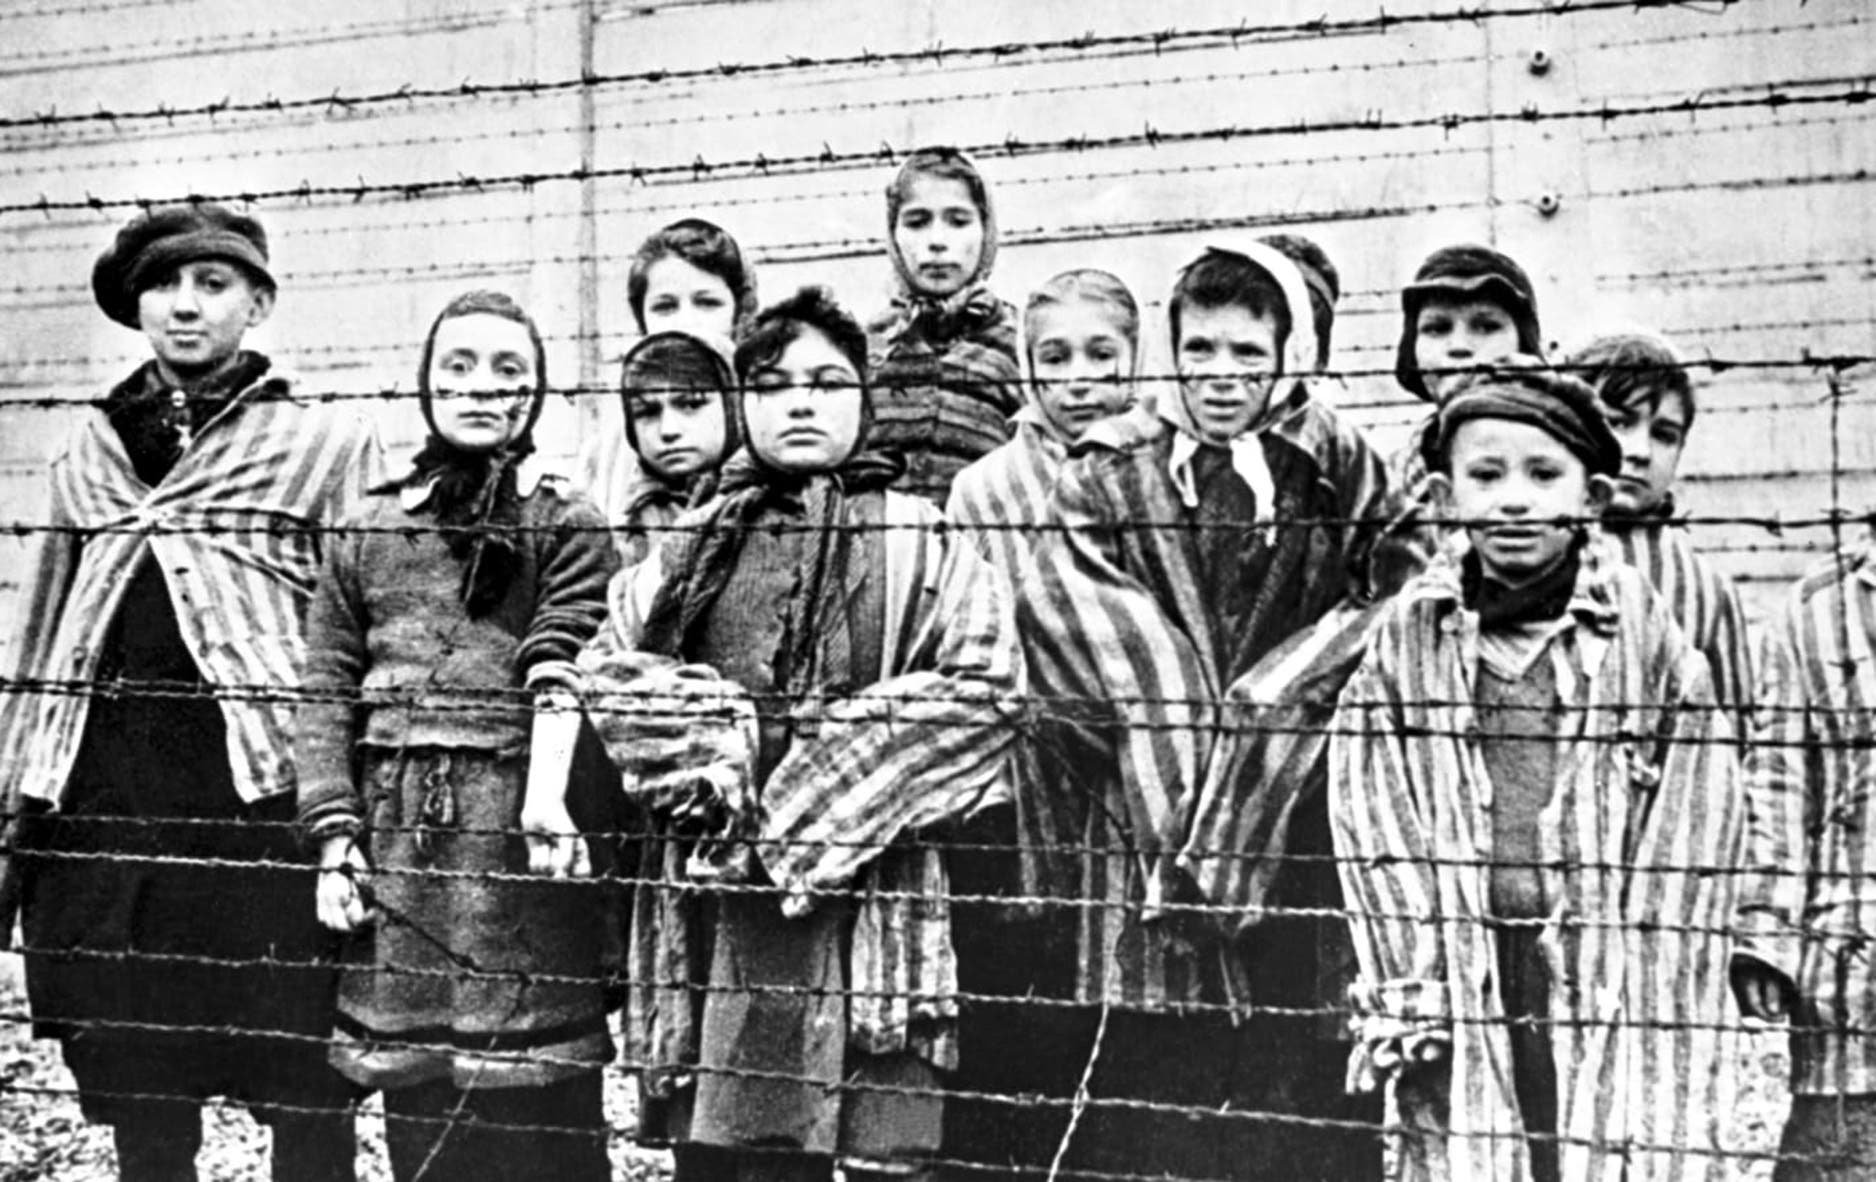 What Do COVID-19 Rules Have to Do With the Holocaust?